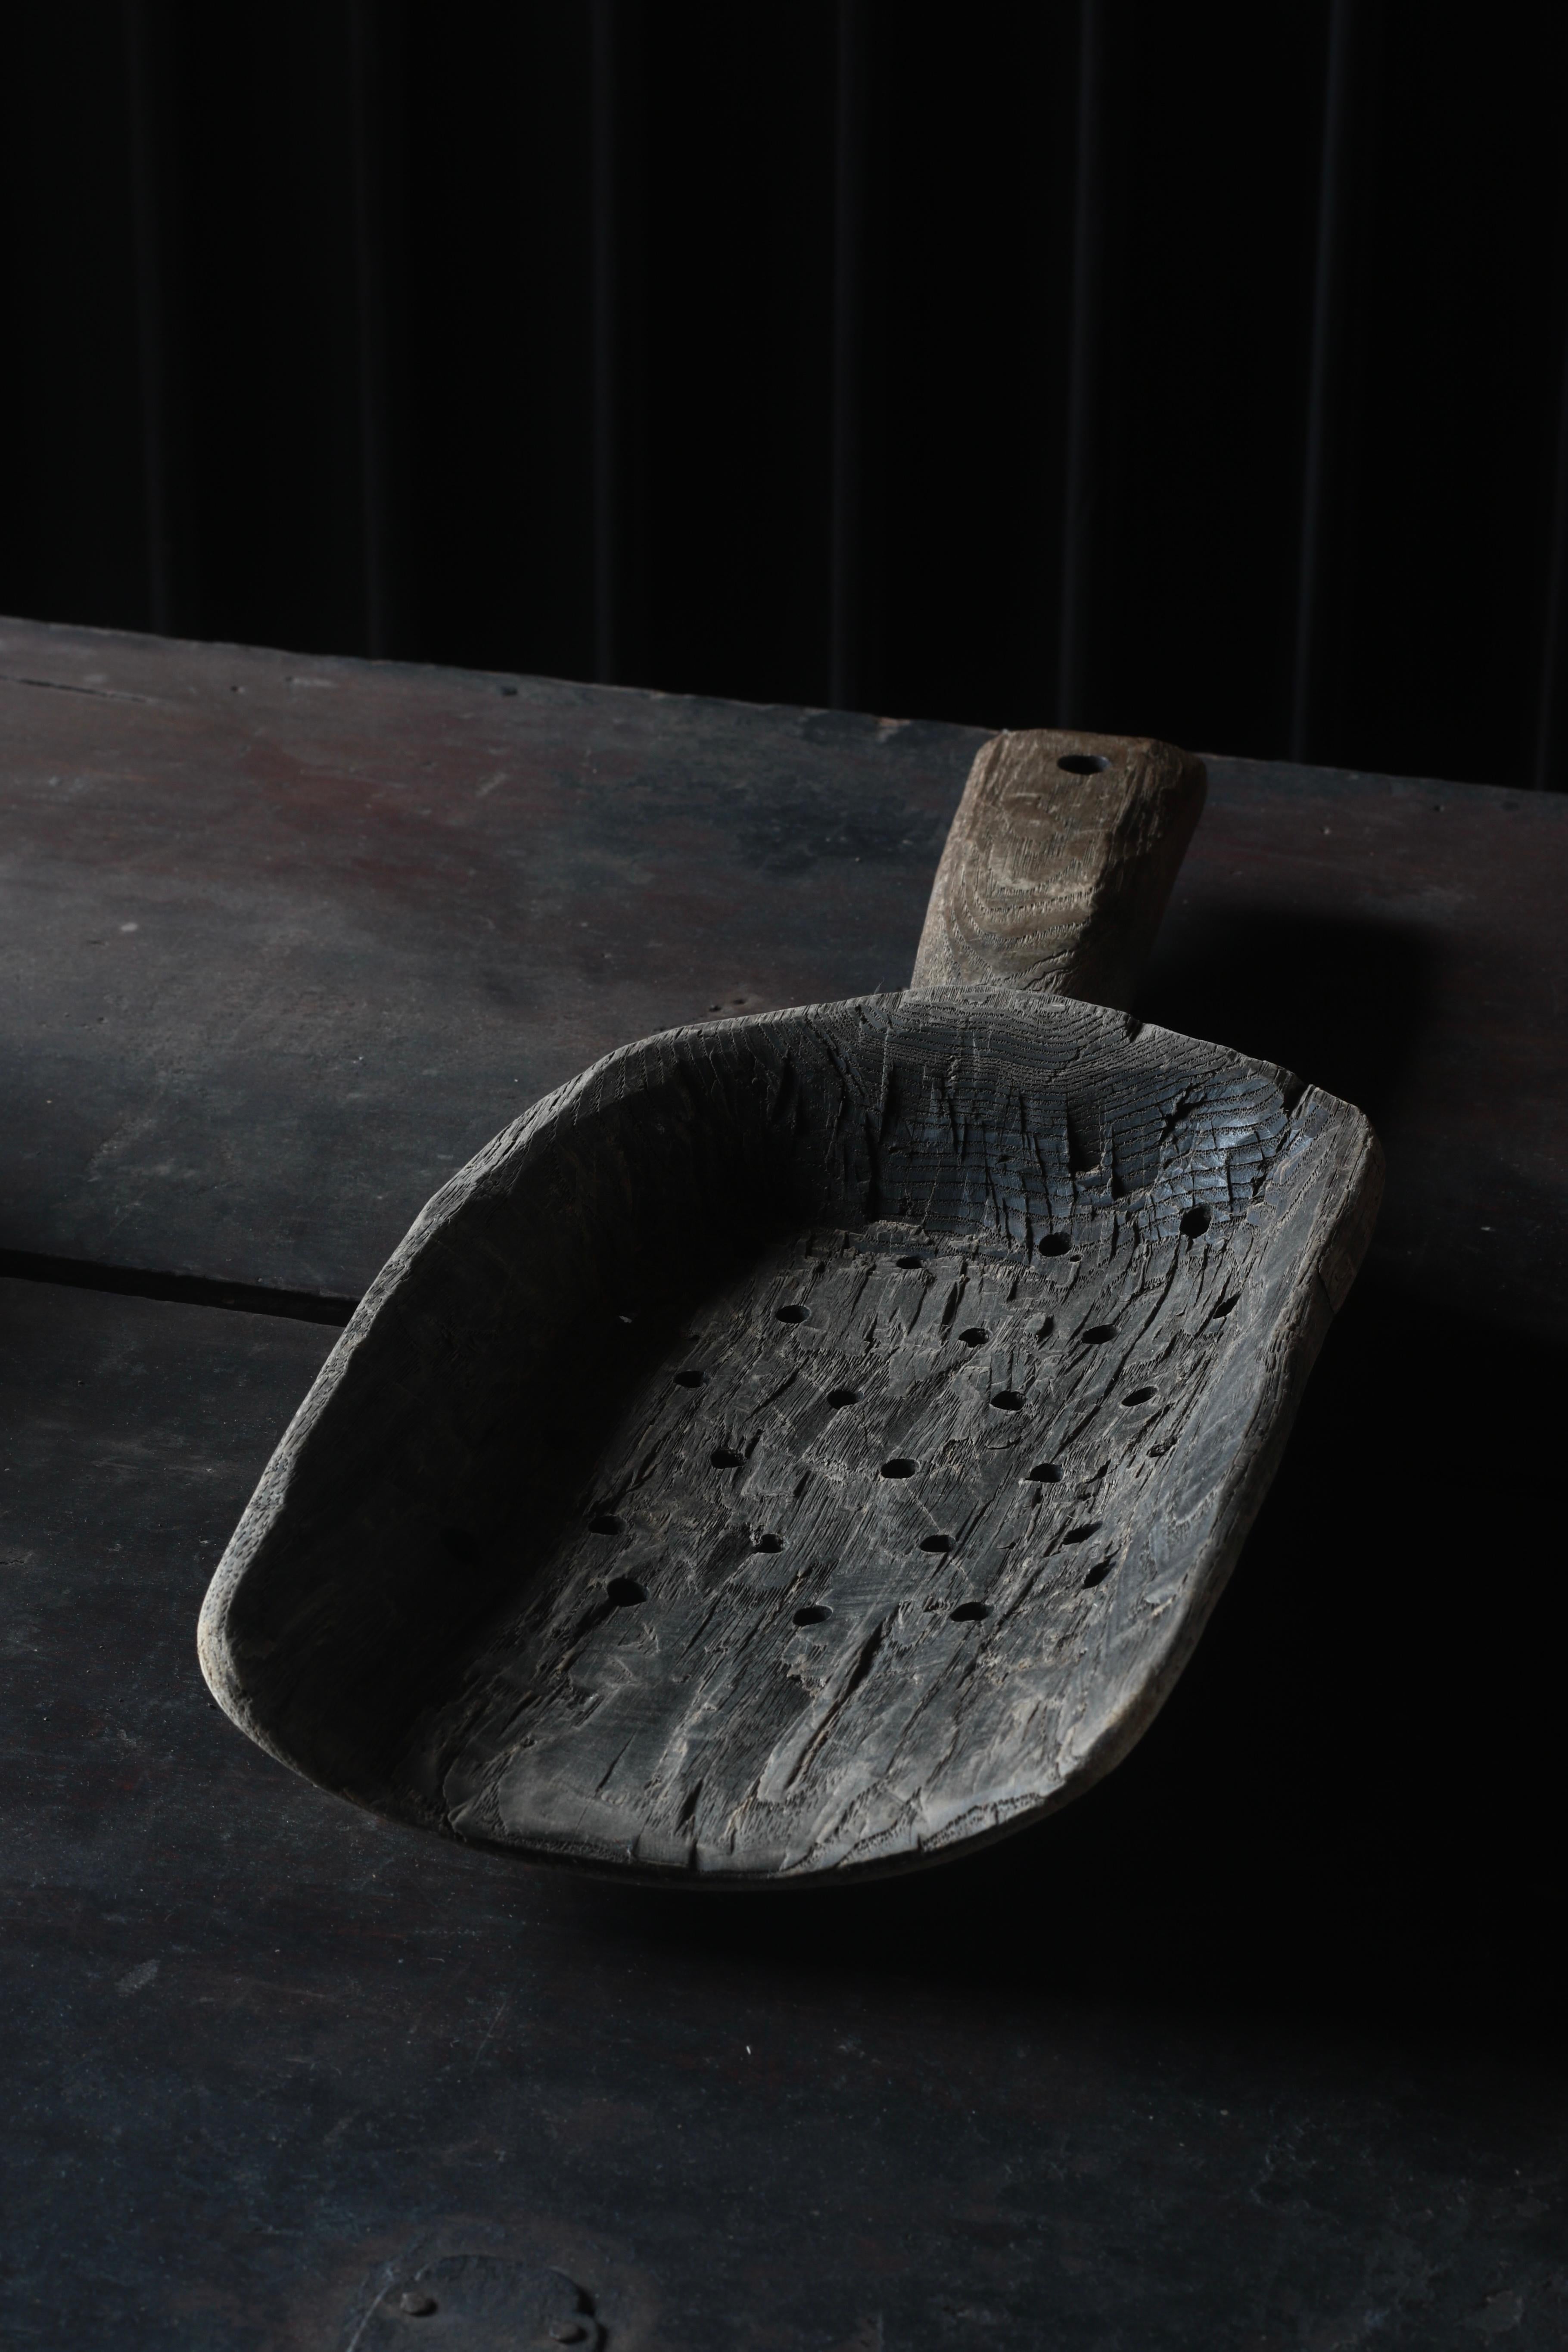 This is a wooden shovel that was used in old farmers in Japan.

It is made of chestnut wood and hand-carved.

It seems that the user at that time made a hole in order to drain the water.

It seems that it was used as a farming tool in the Tohoku